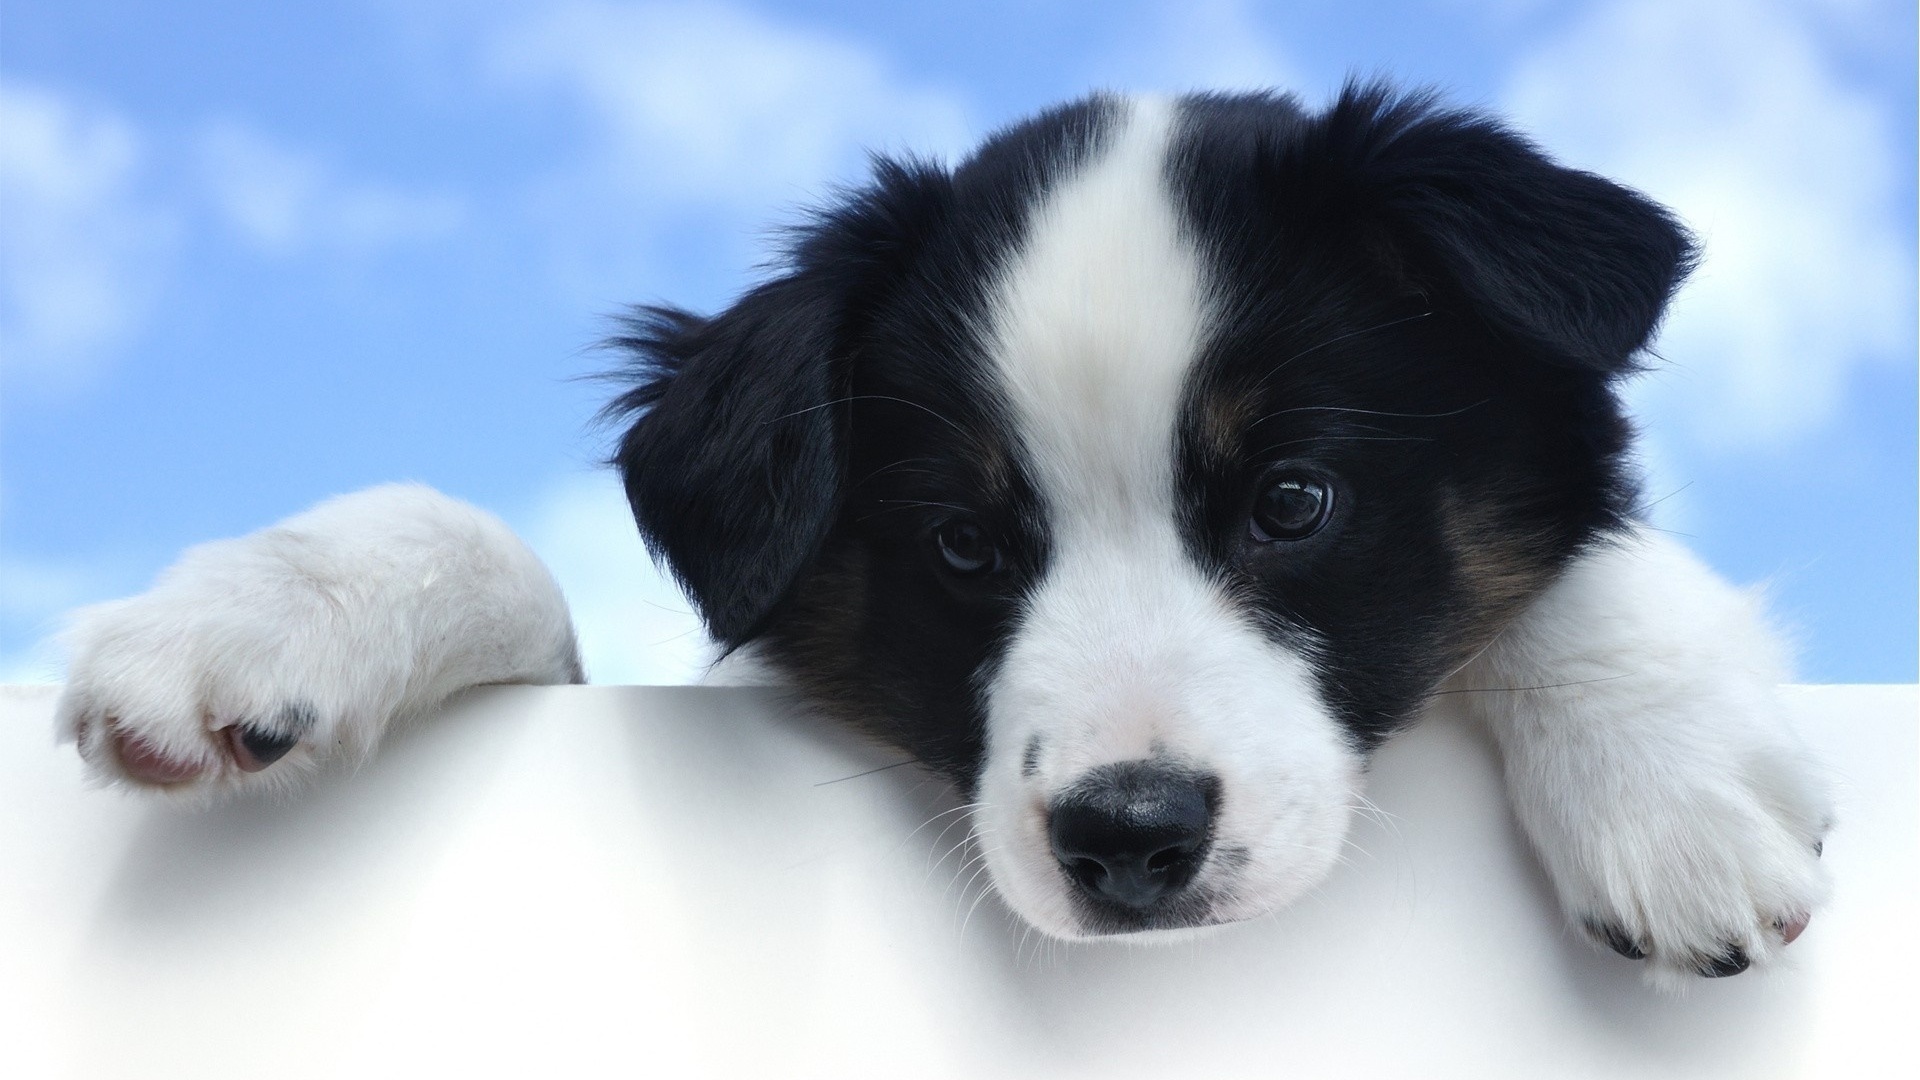 🔥 Download Black White Puppies Dog Wallpaper HD High Resolution by